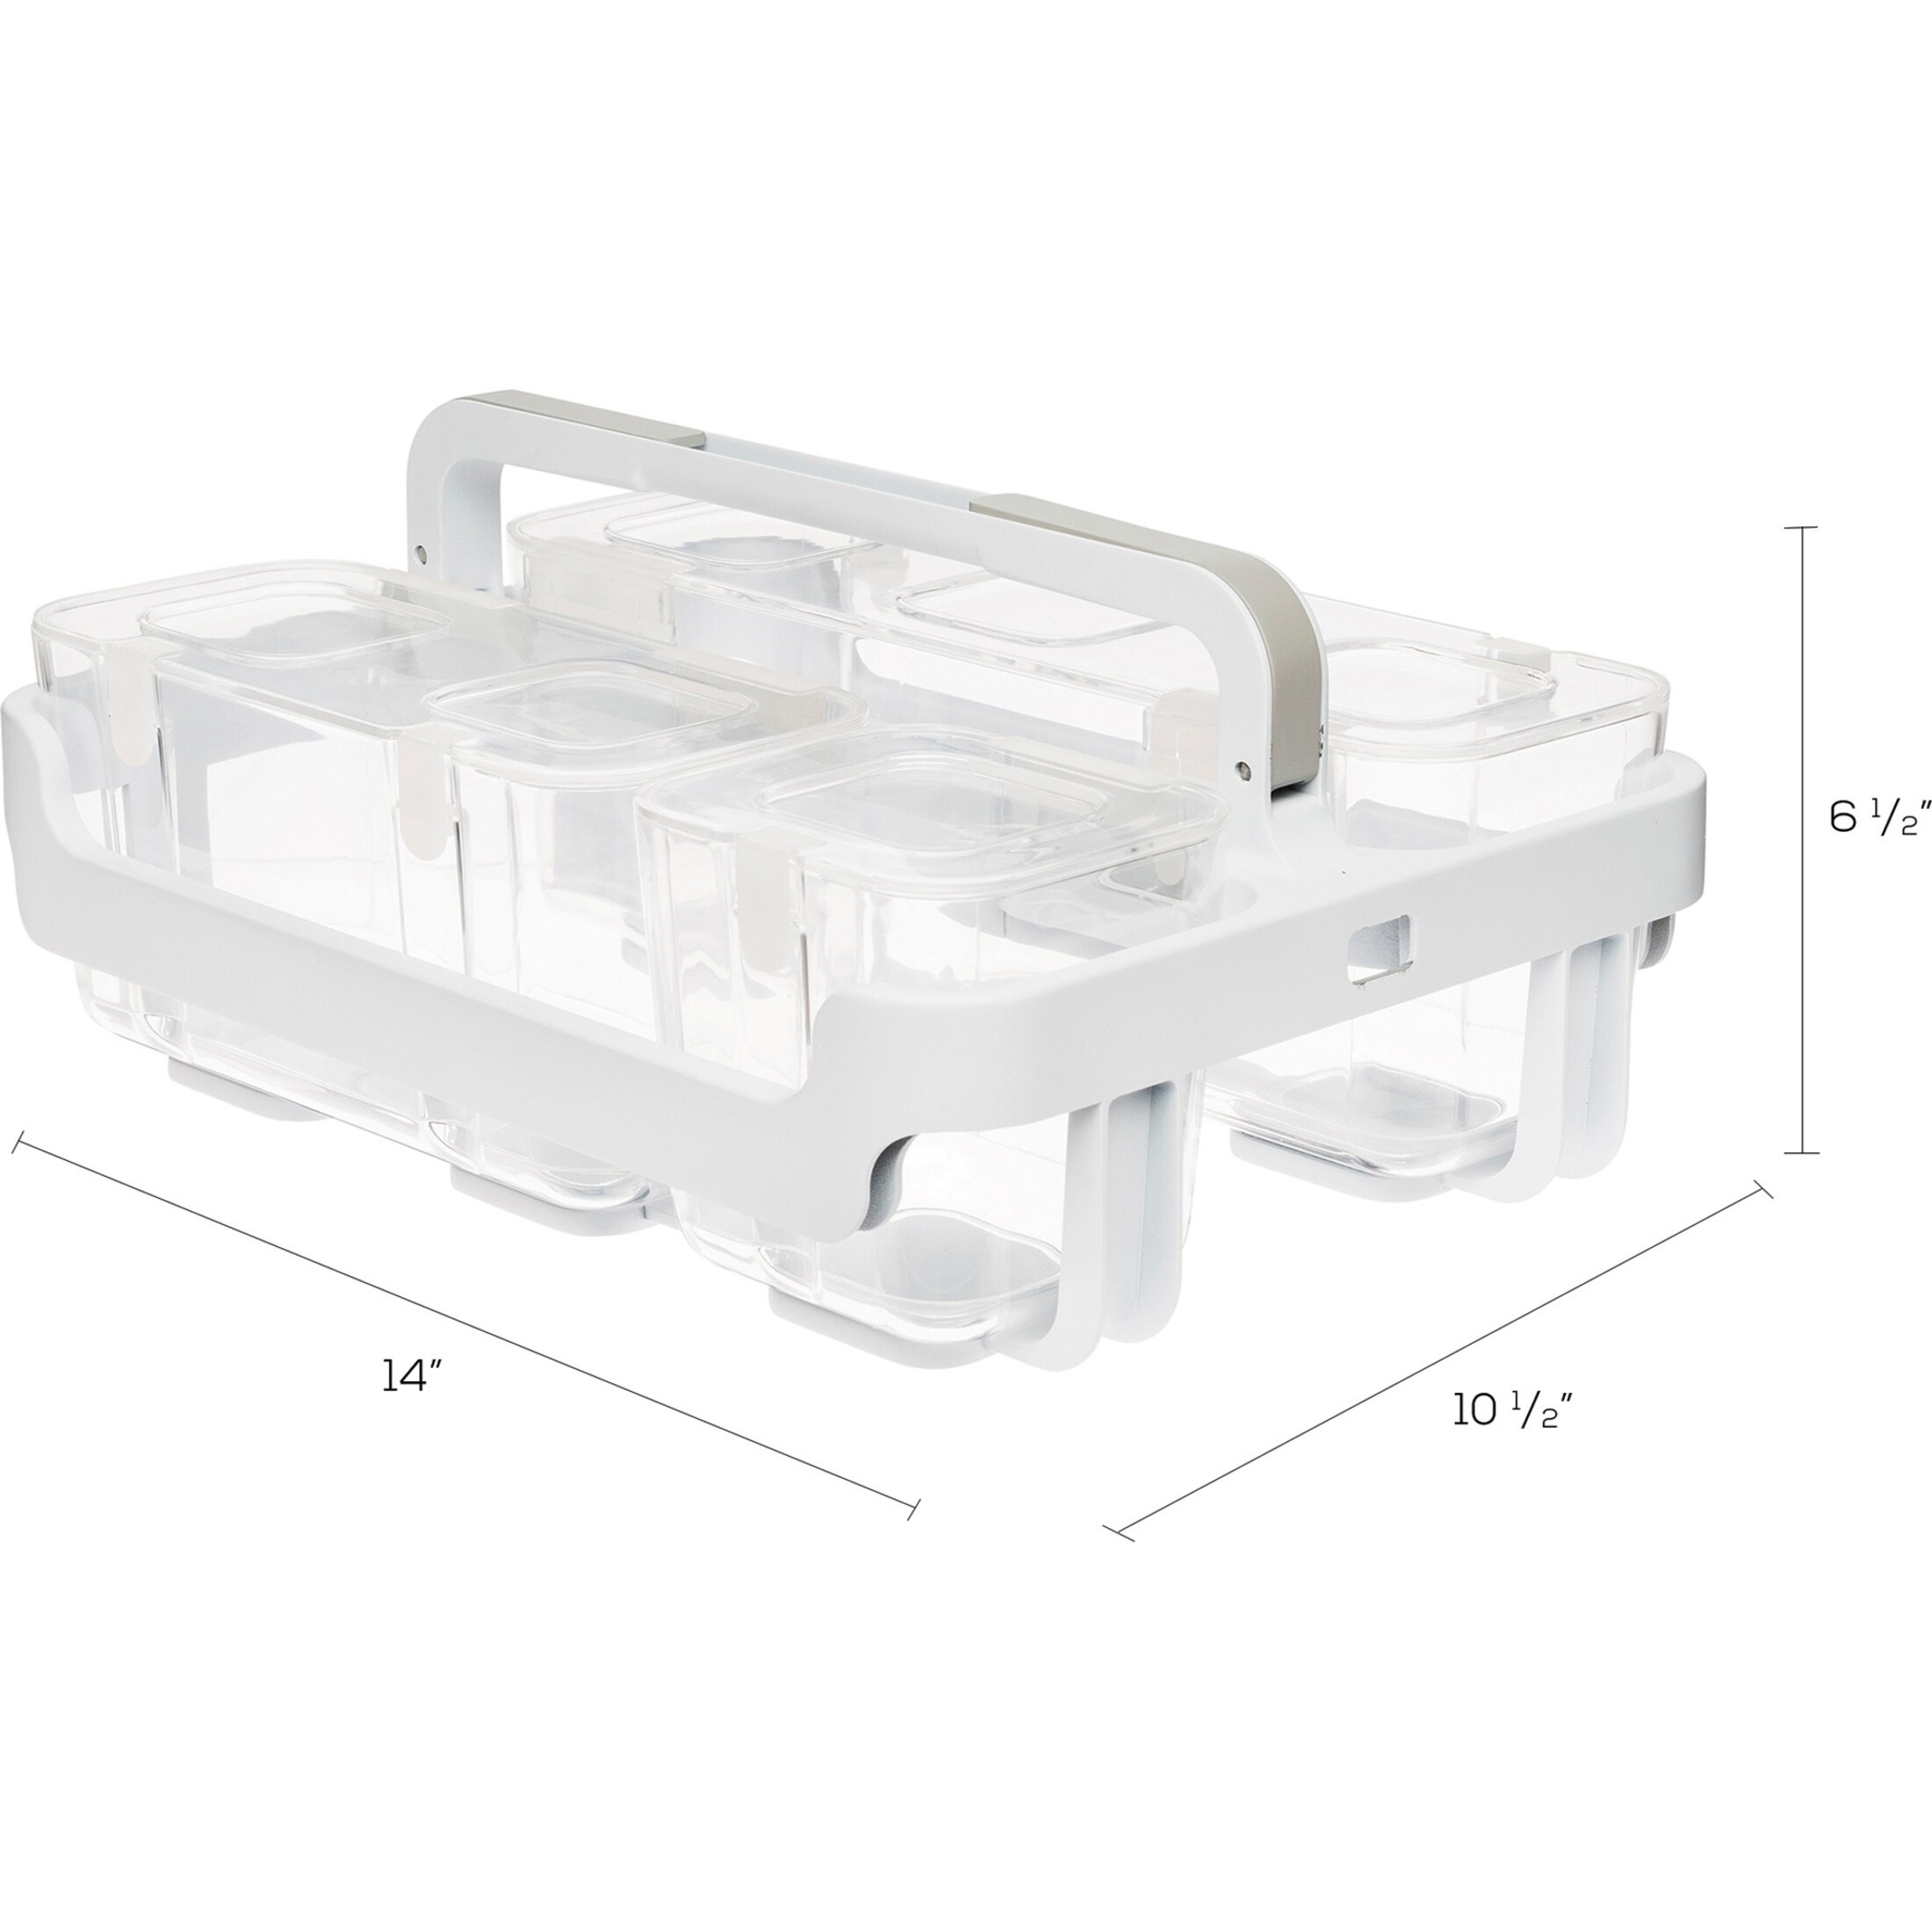 https://ak1.ostkcdn.com/images/products/is/images/direct/dd0607b65a584303c05a7b37f12859b812a4d686/Deflecto-Stackable-Caddy-Organizer.jpg